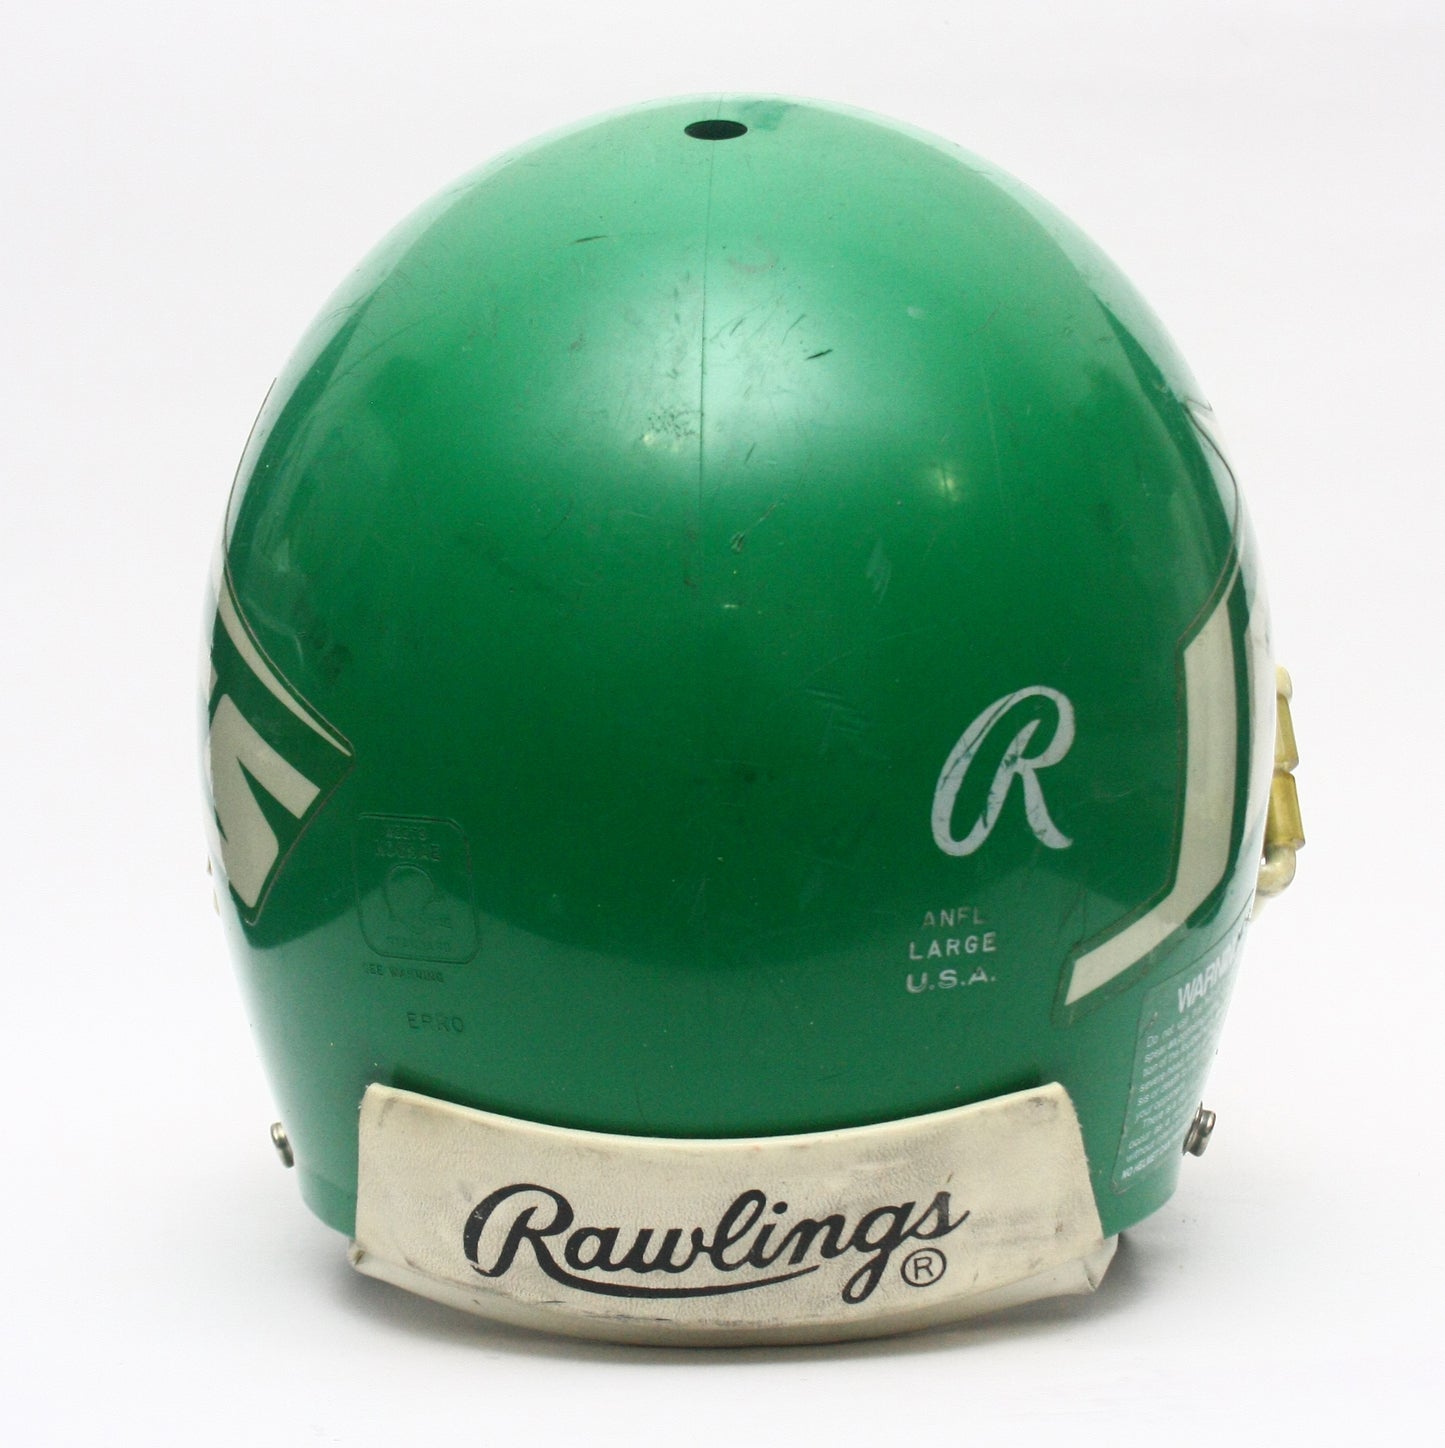 Vintage Game Used 1980s New York Jets Rawlings ANFL Football Helmet Size Large